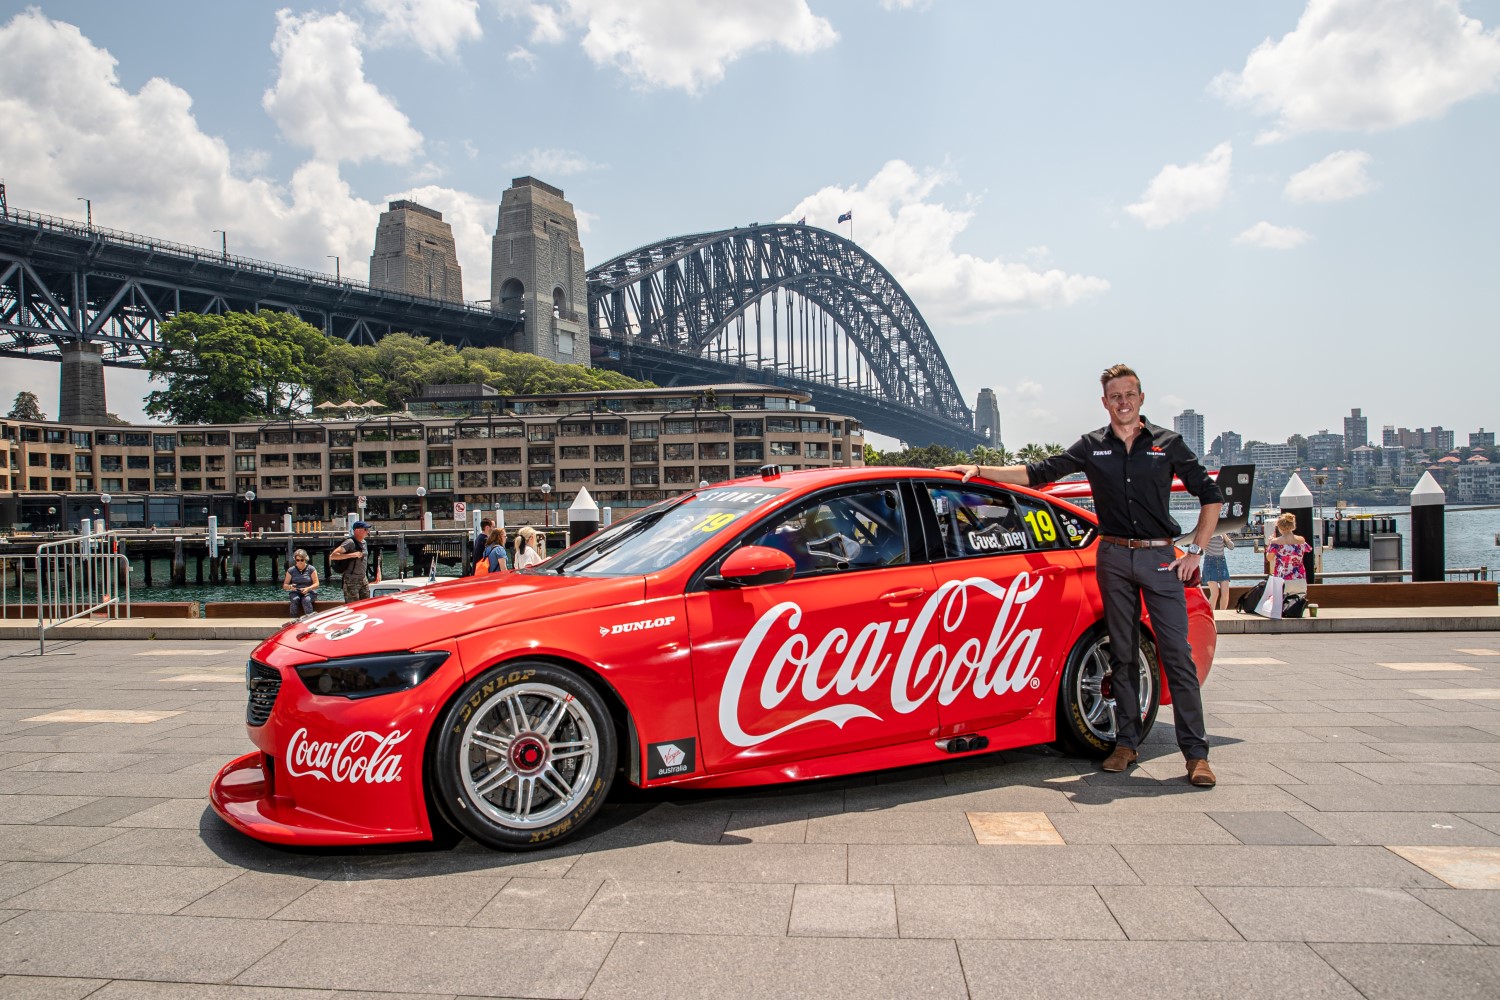 James Courtney with his eye-catching Cola-Cola livery